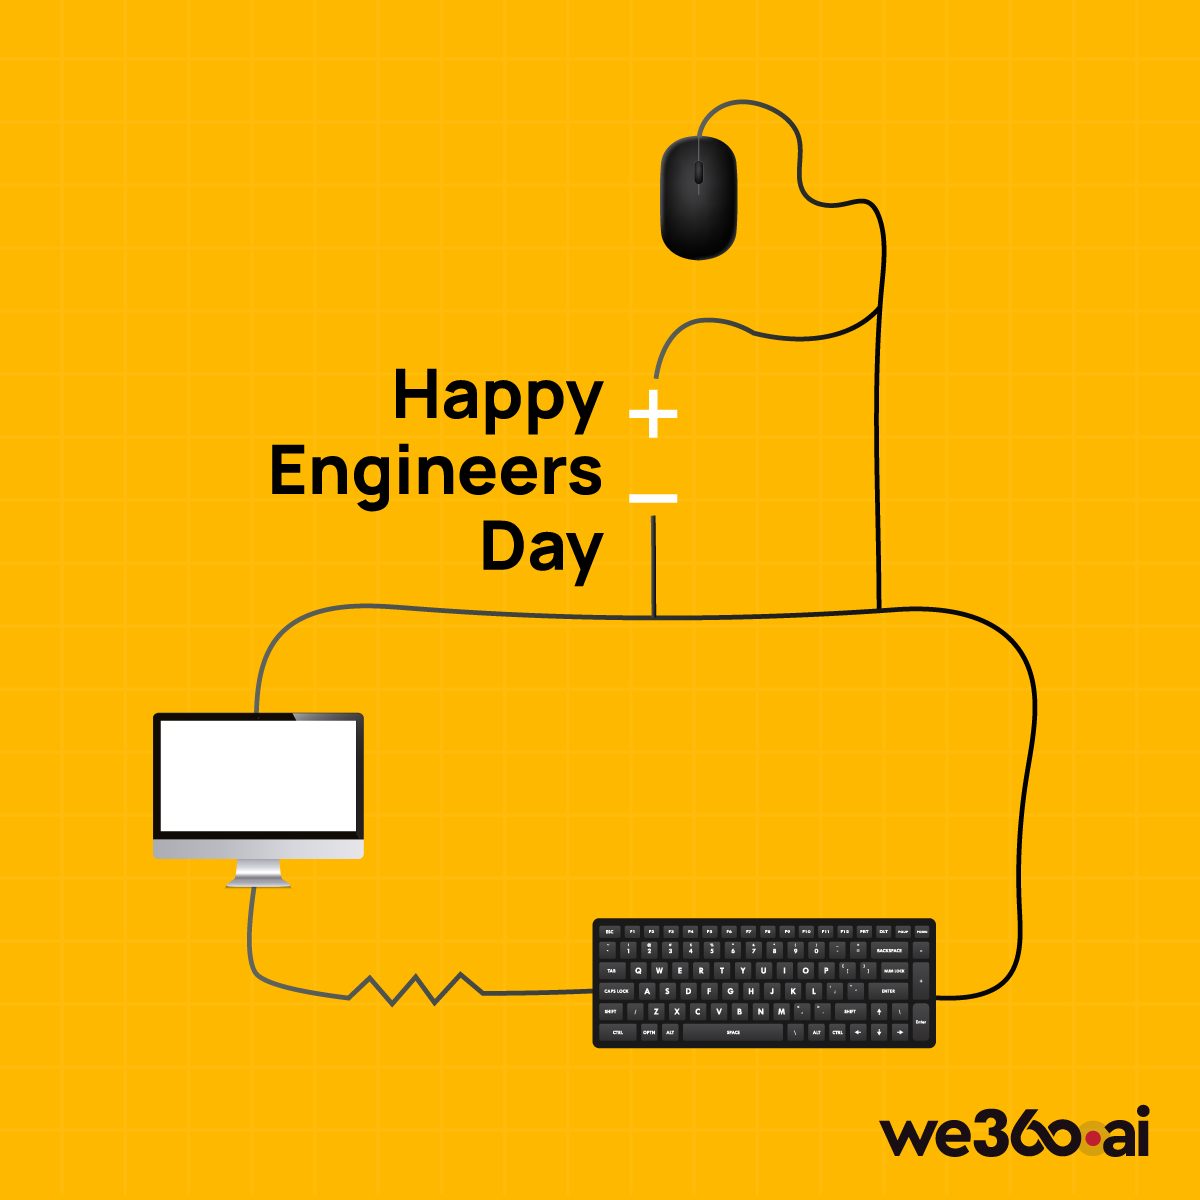 Bridges or screens, tools unseen, for every marvel in between - your productivity-booster role can't be denied, soaring beyond the highest tide. Happy National Engineers Day, in gratitude, we confide!💡

#happyengineeringday #inovation #We360ai #productivitybooster